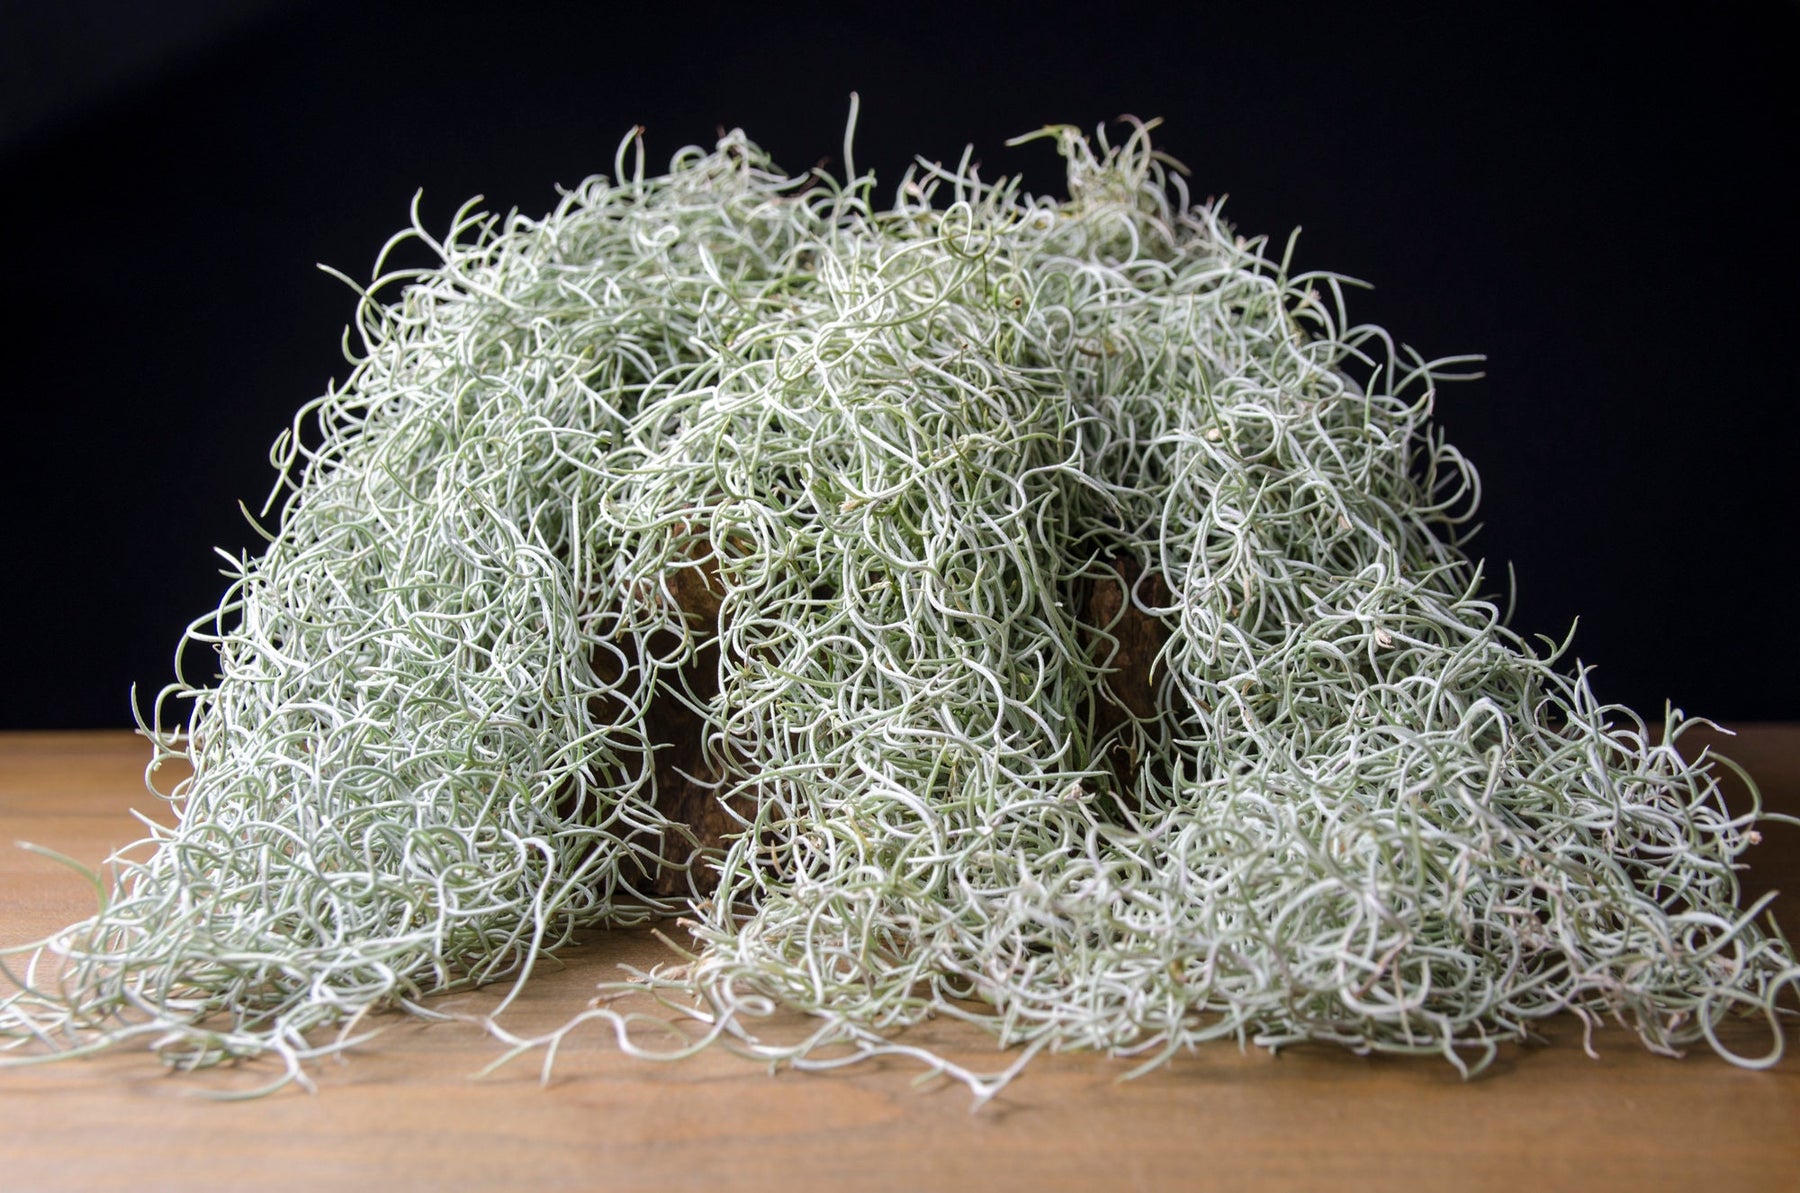 Spanish Moss Rare Curly Form - Fragrant Orange Blossoms – The